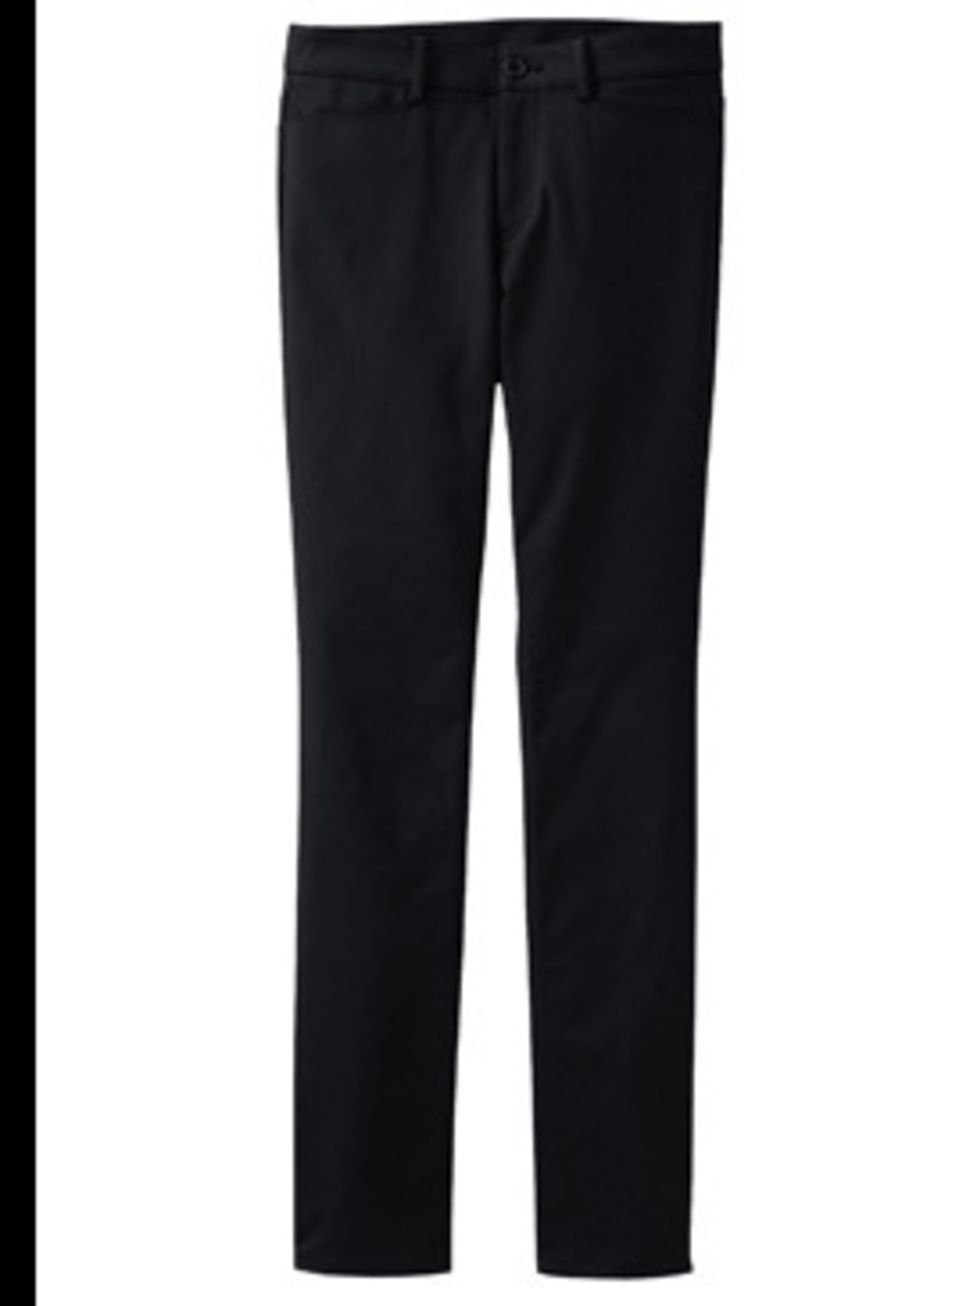 <p>Trousers, £24.99 from Uniqlo. For stockists call 0208 247 9200</p>